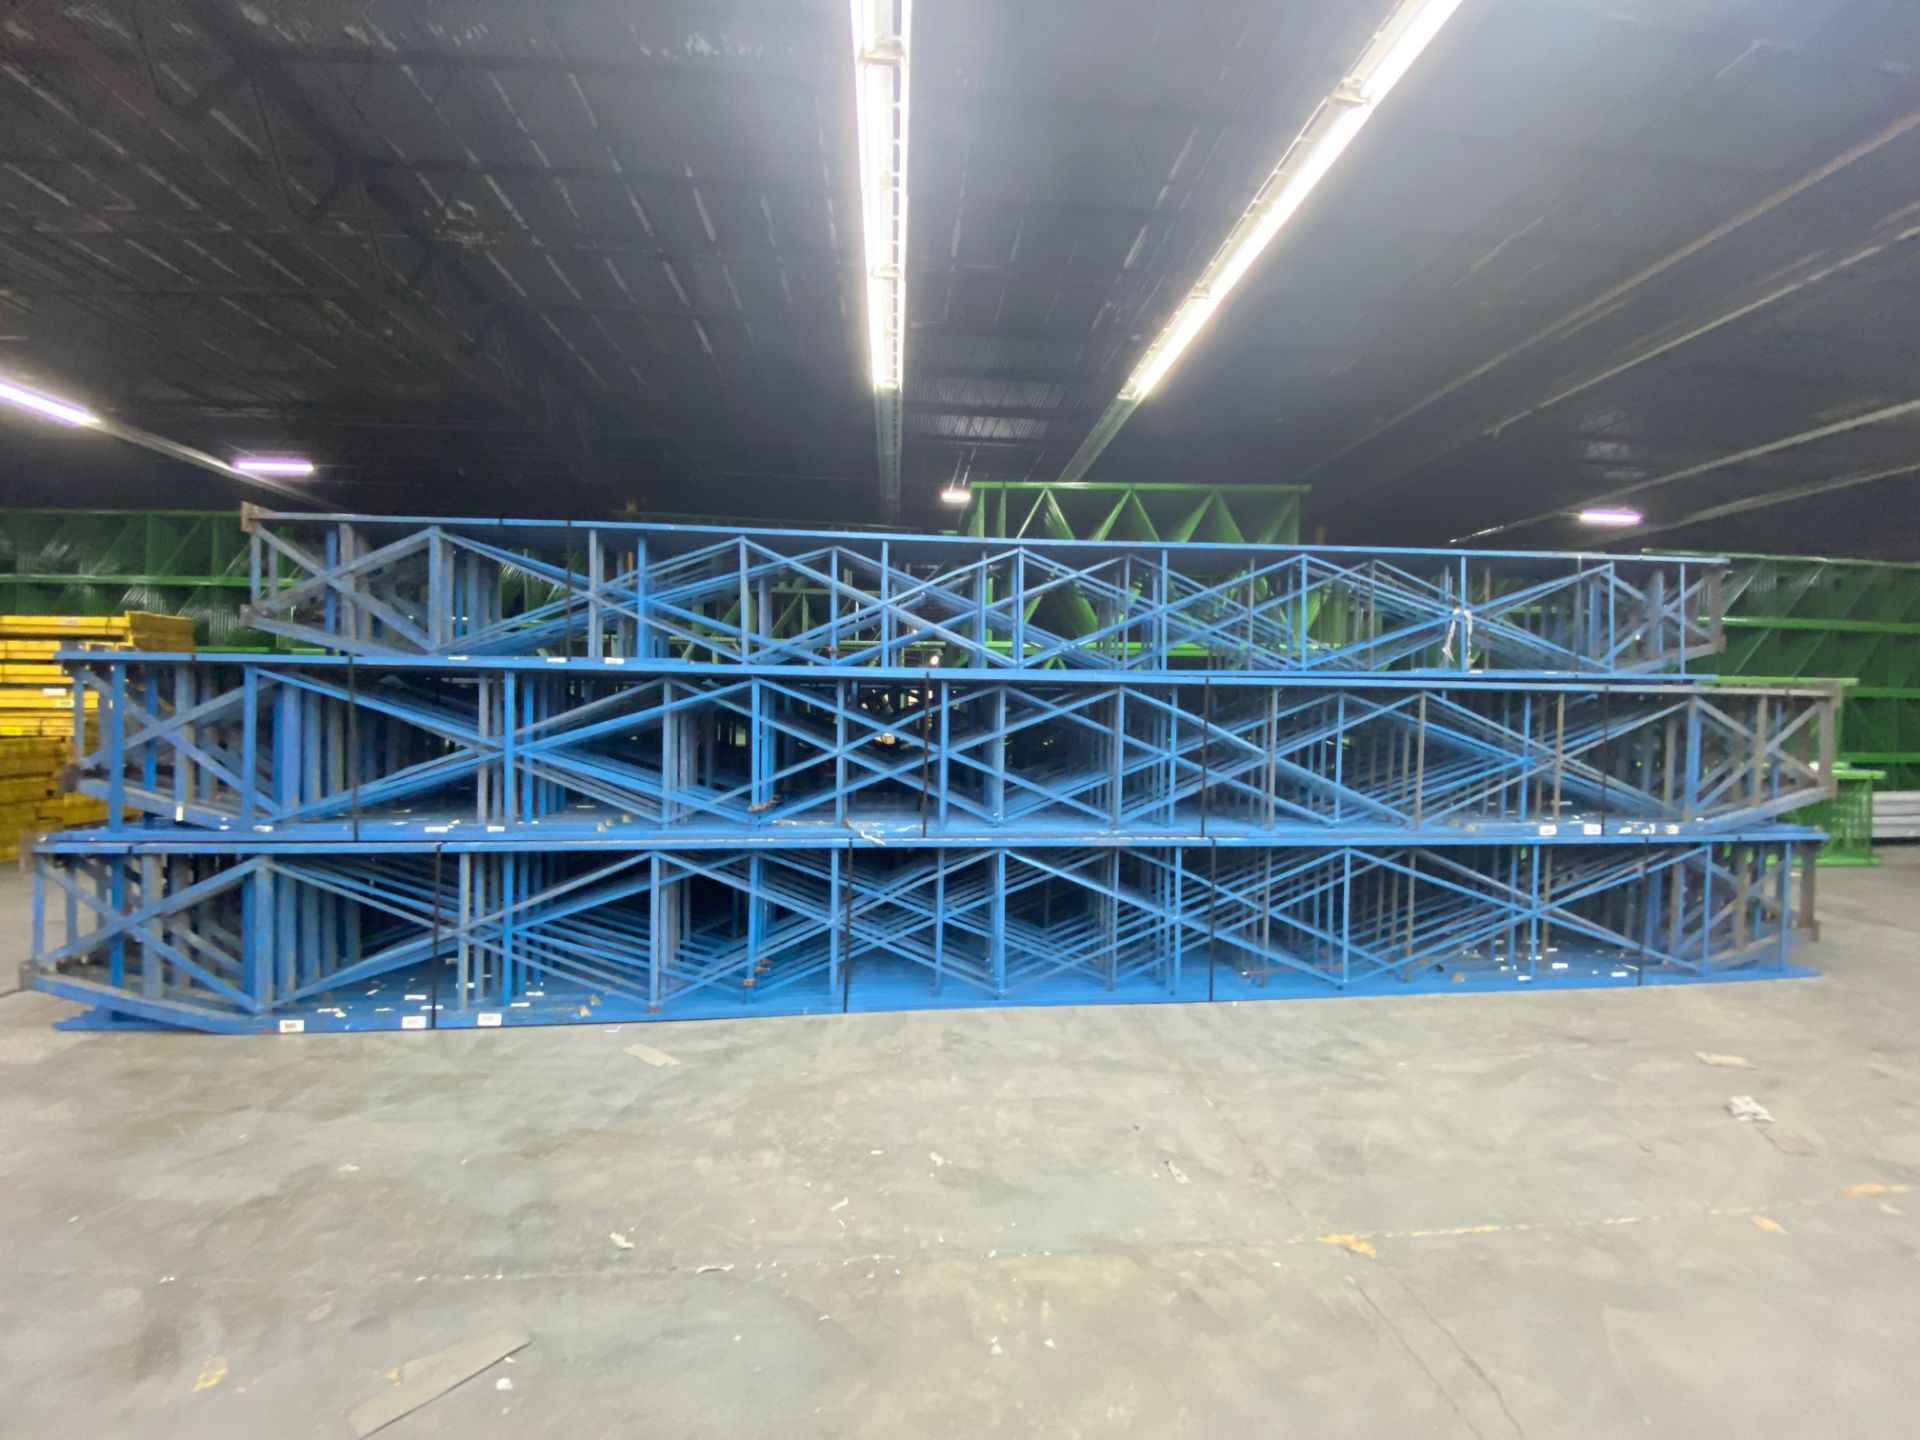 USED 30 PCS OF STRUCTURAL UPRIGHT. SIZE 33'H X 36"D, BLUE